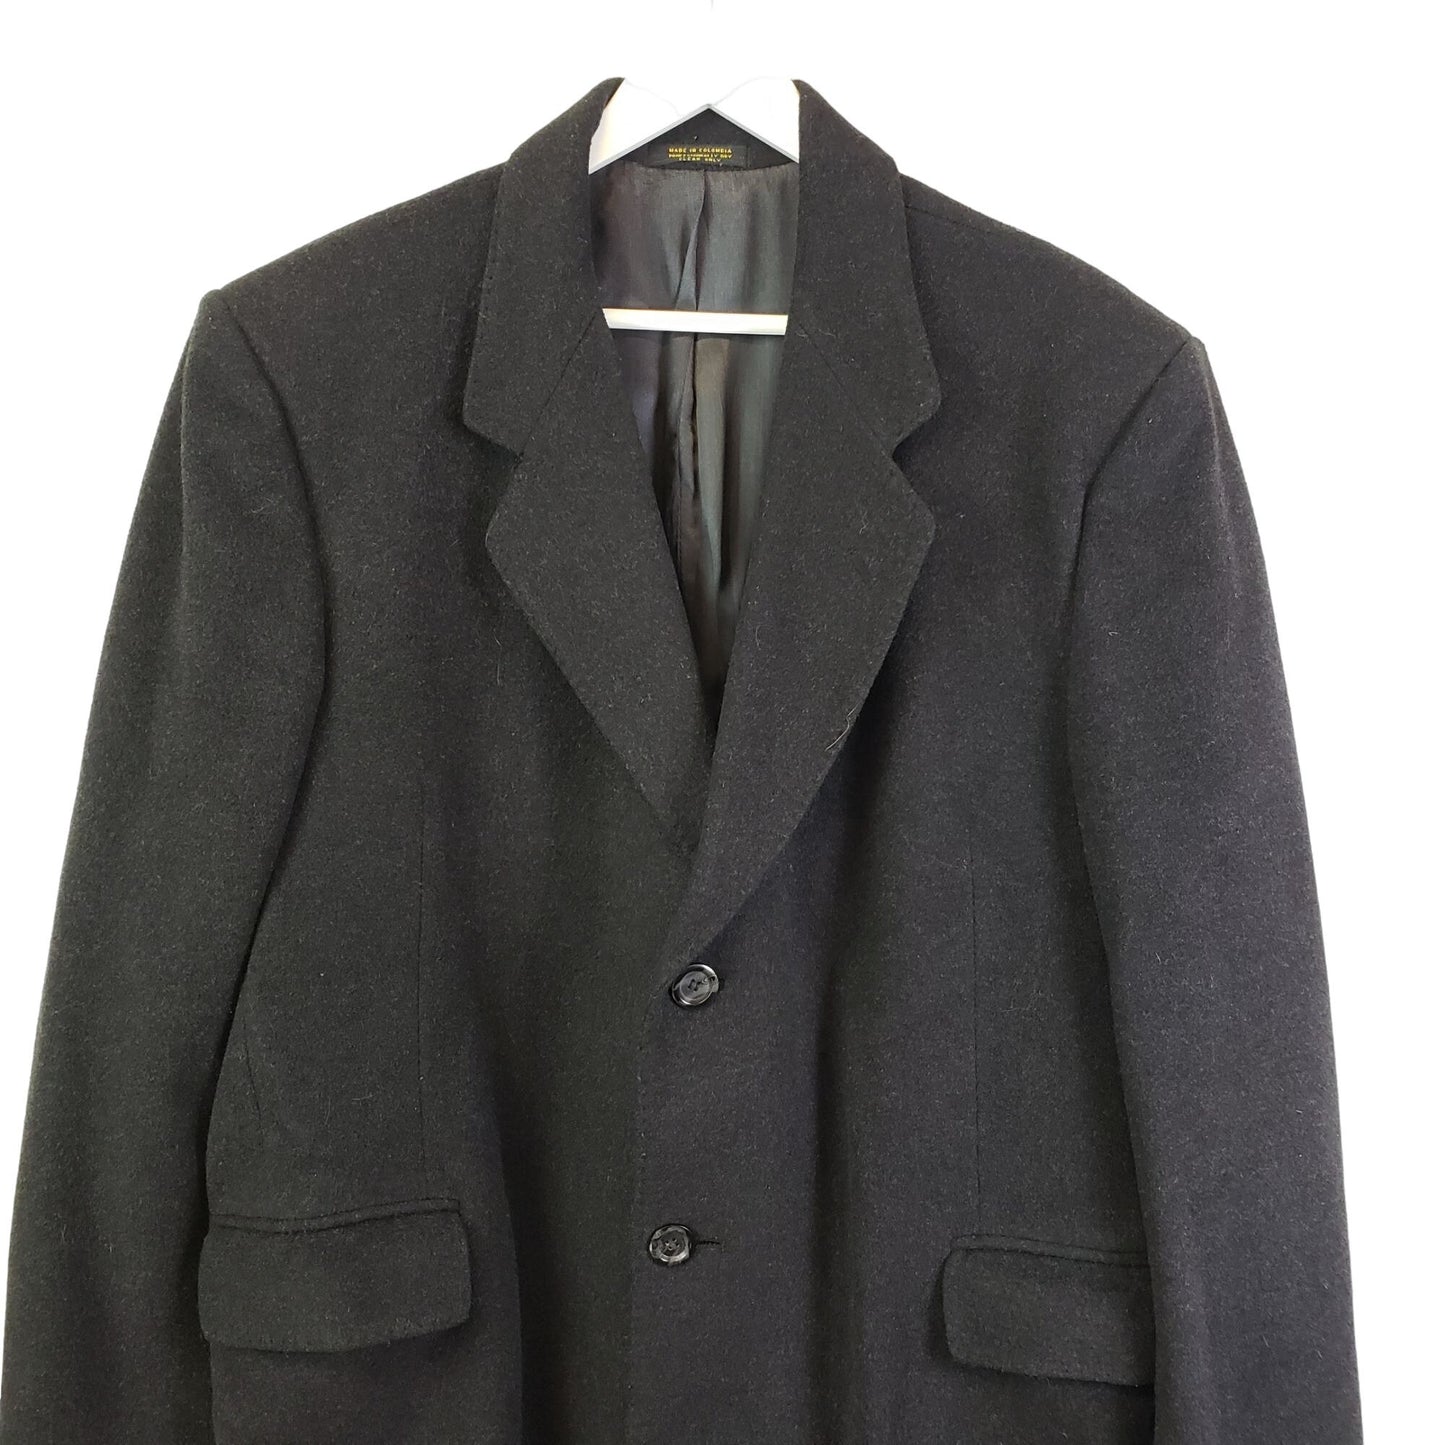 Silver Cloud Single Breasted Cashmere Blend Overcoat Size 44R